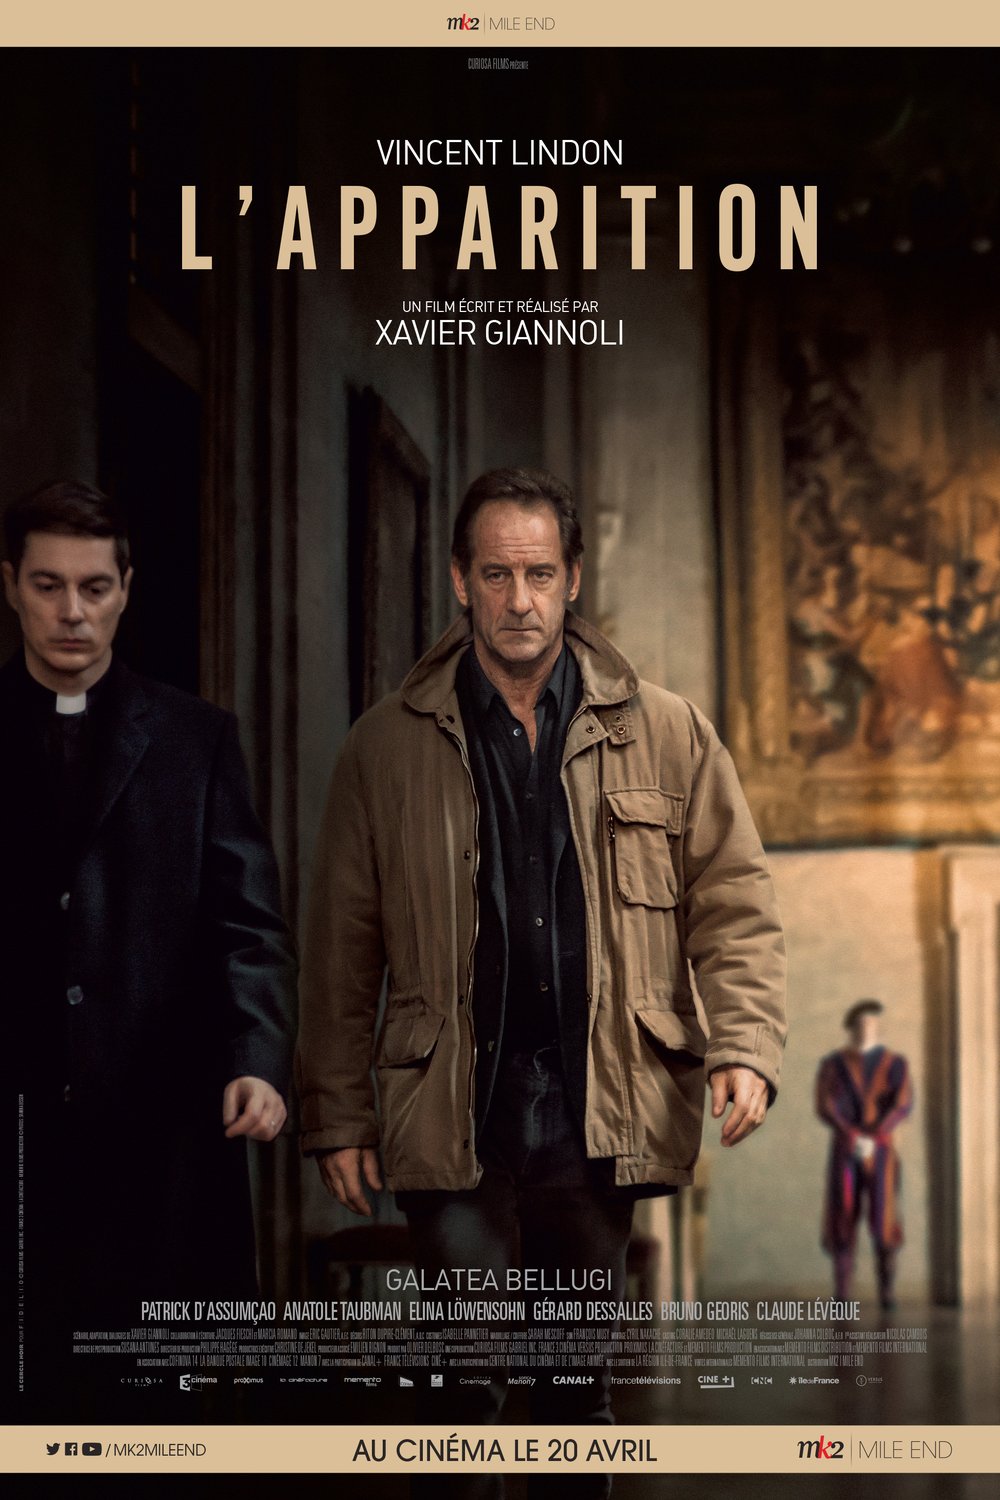 Poster of the movie L'Apparition v.f.